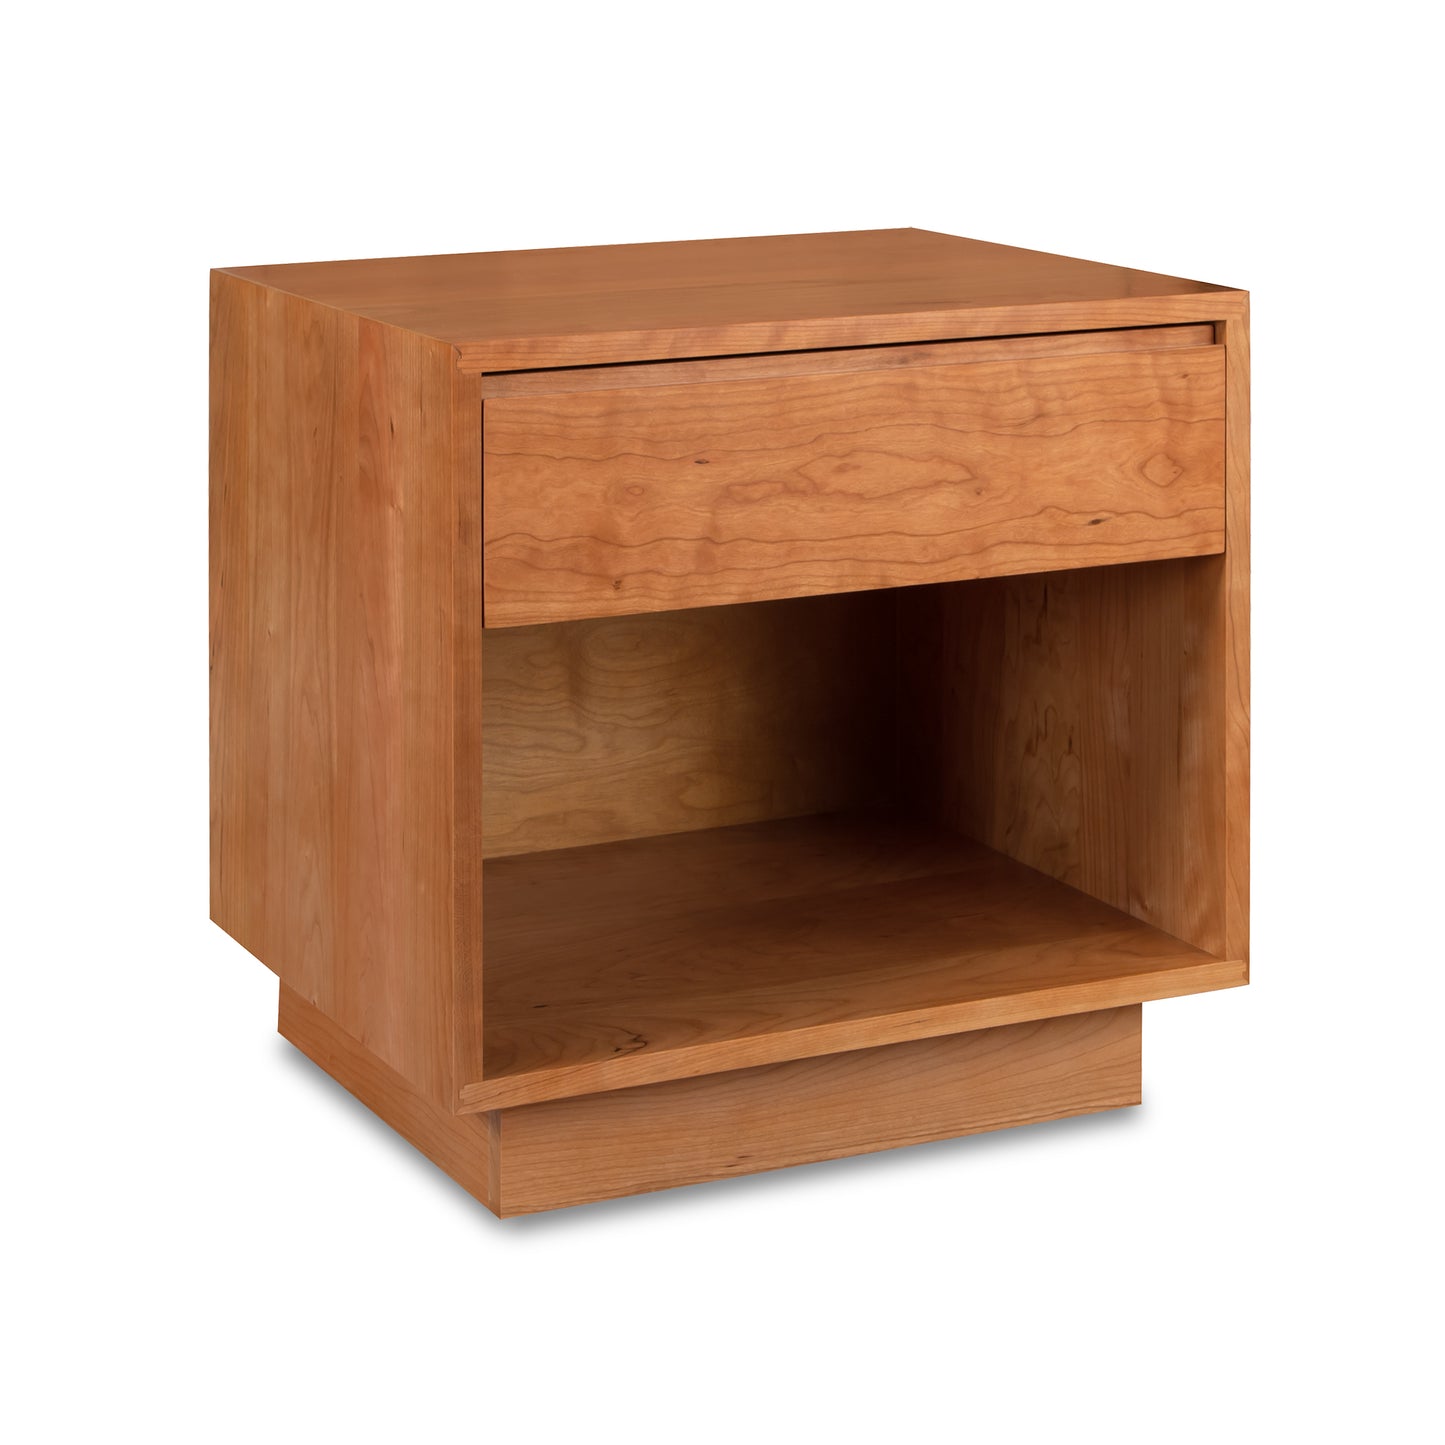 A handcrafted Sutton 1-Drawer Enclosed Shelf Nightstand made of solid wood, featuring a drawer on top, produced by Lyndon Furniture.